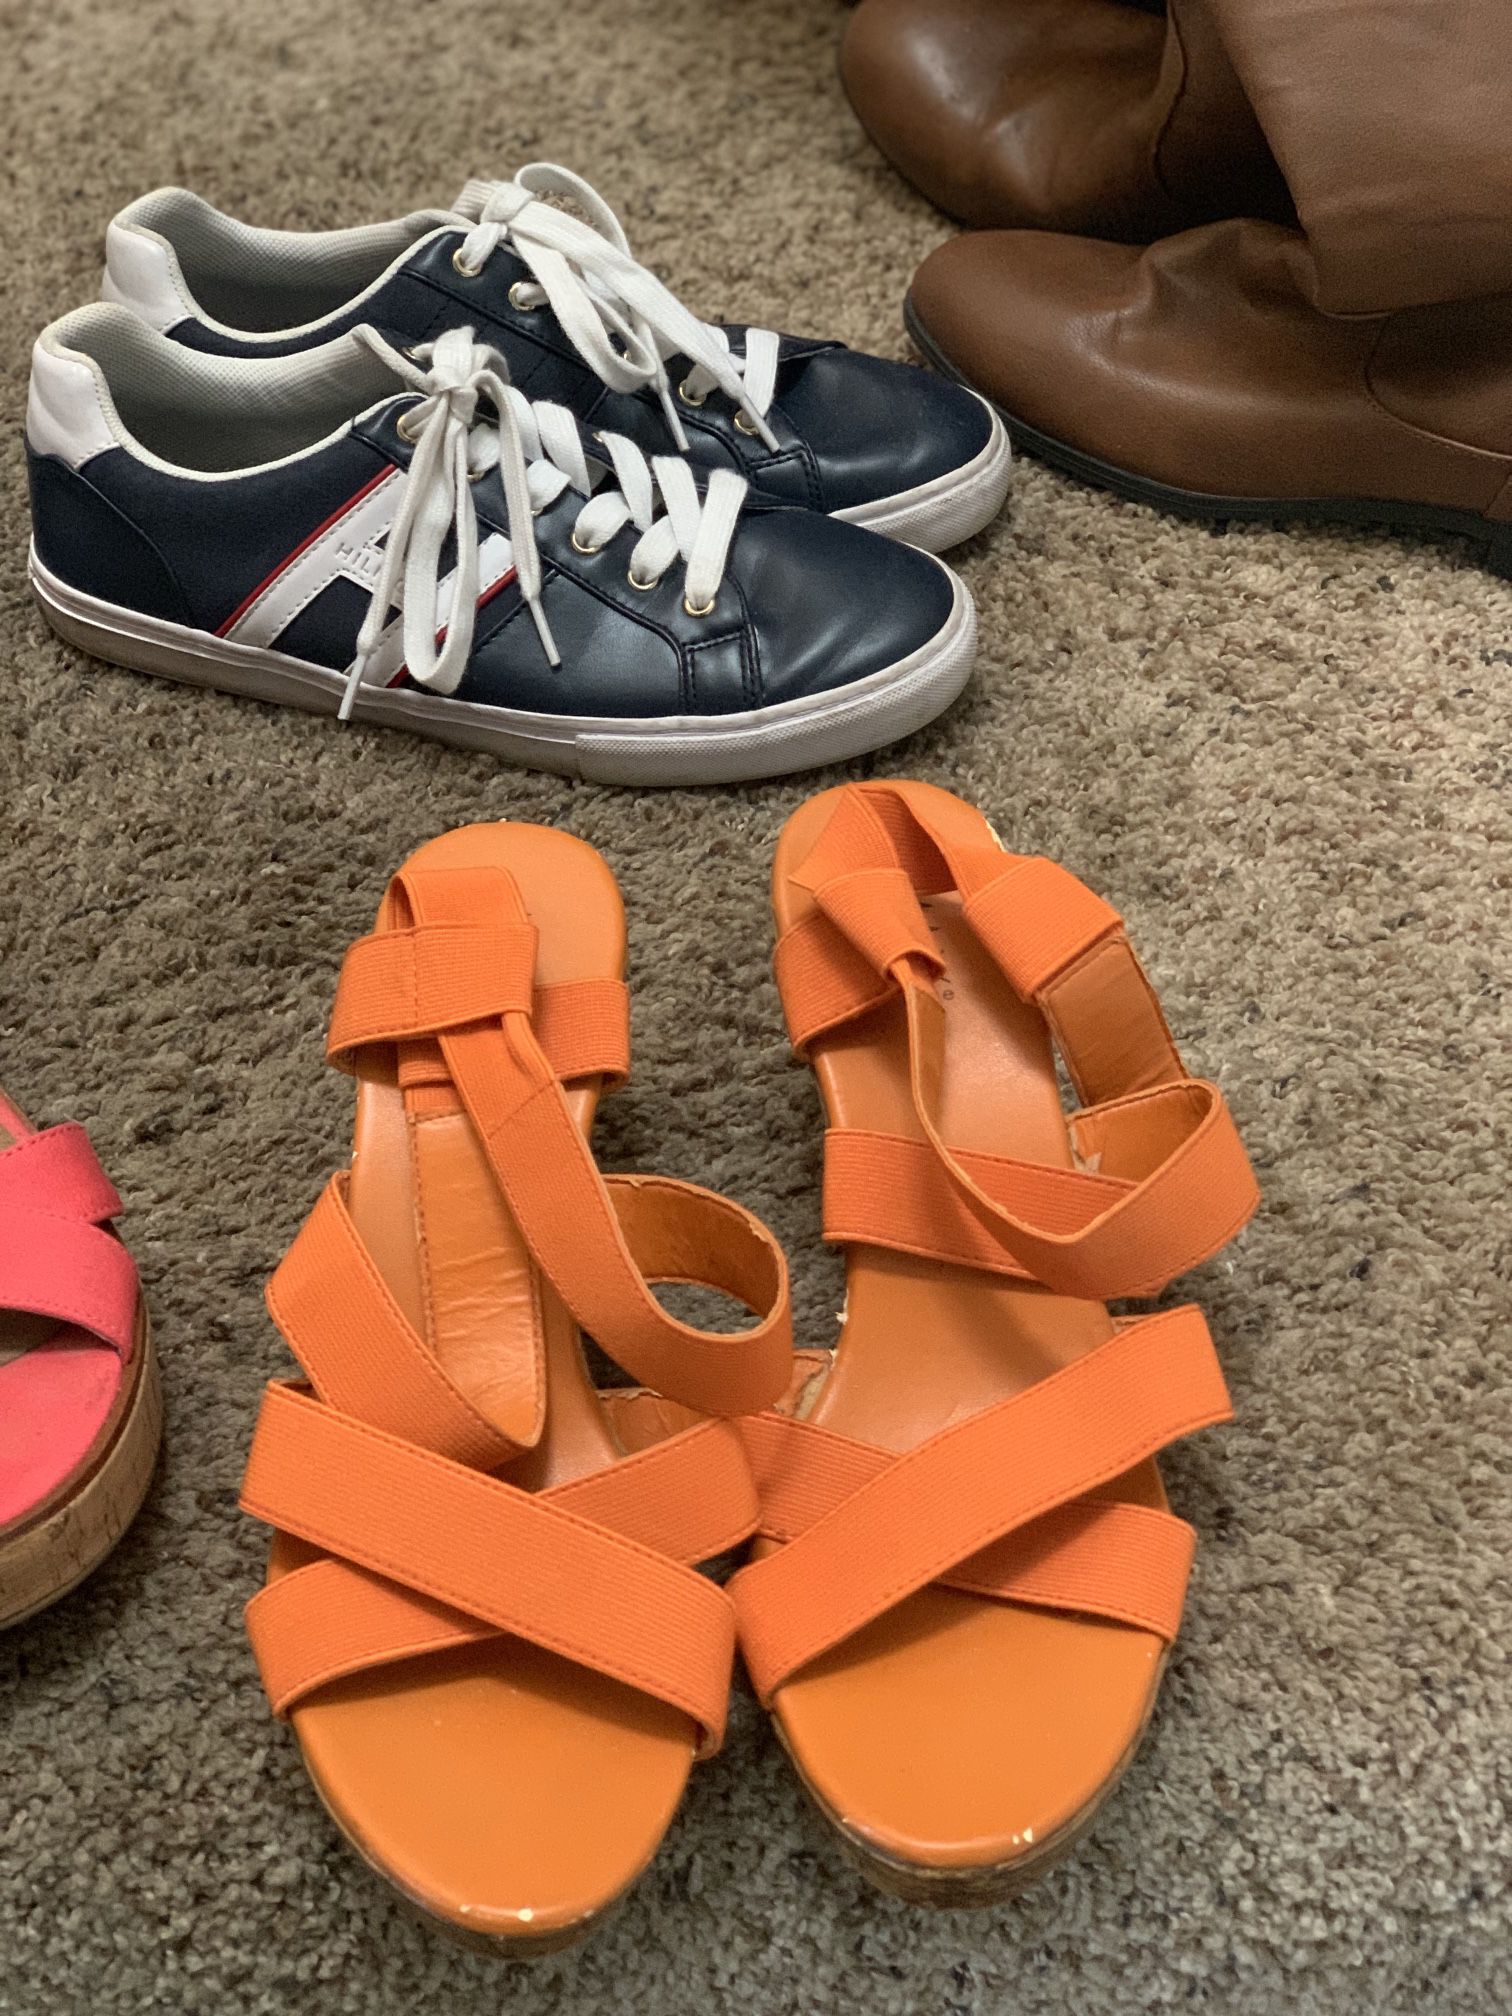 Five Pair Of Size 9 Shoes